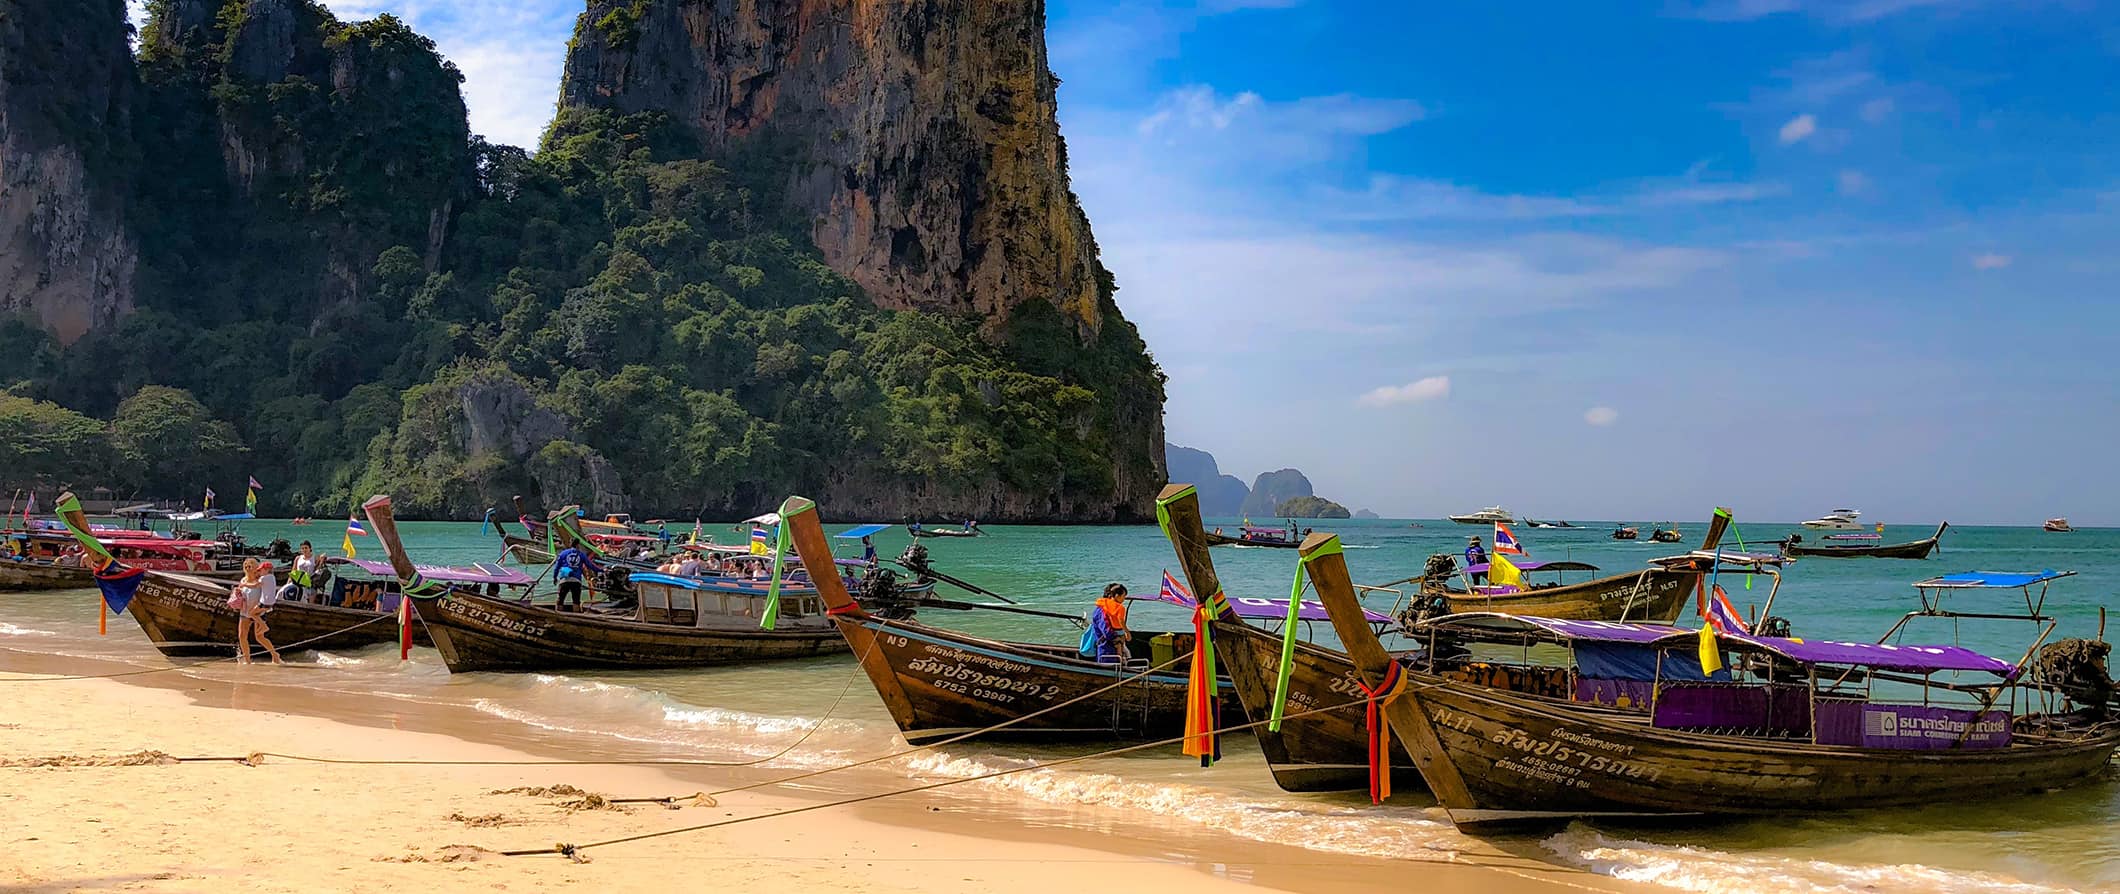 A row of longtail boats parked on a stunning beach in Thailand